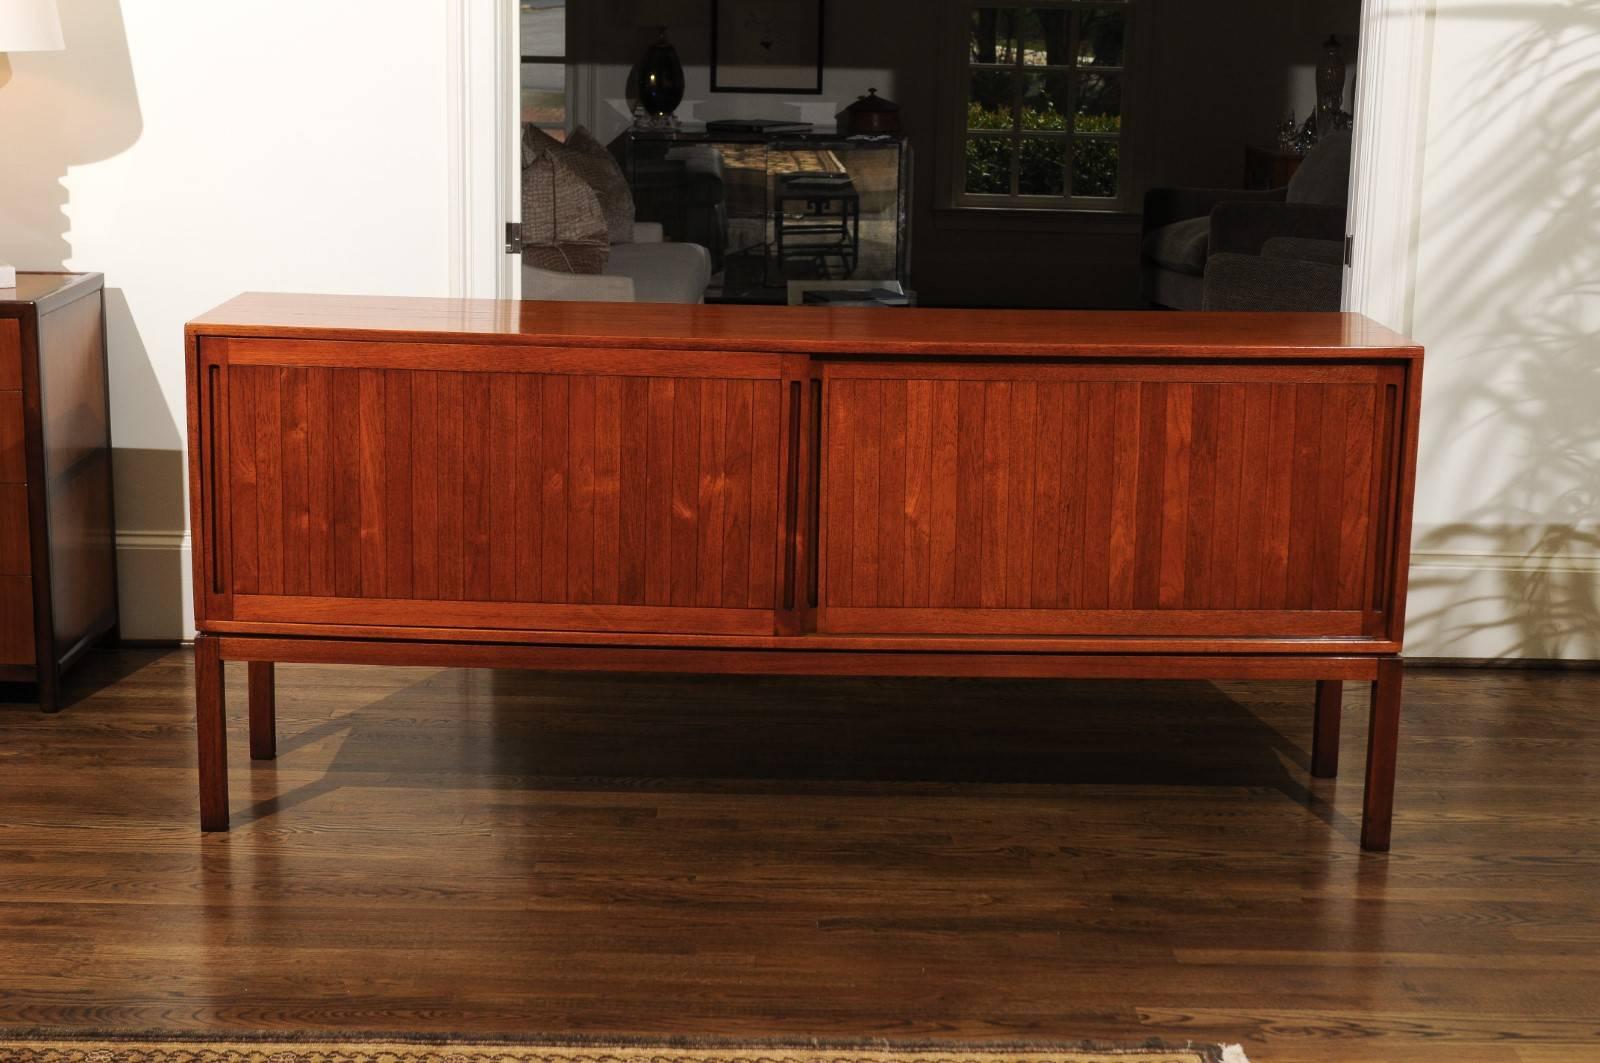 A stunning muilti-purpose cabinet or credenza, circa 1963. This particular design is routinely attributed to Kurt Ostervig. Exceptionally crafted teak construction with simple elegant lines. Beautiful finished back that allows the piece to stand